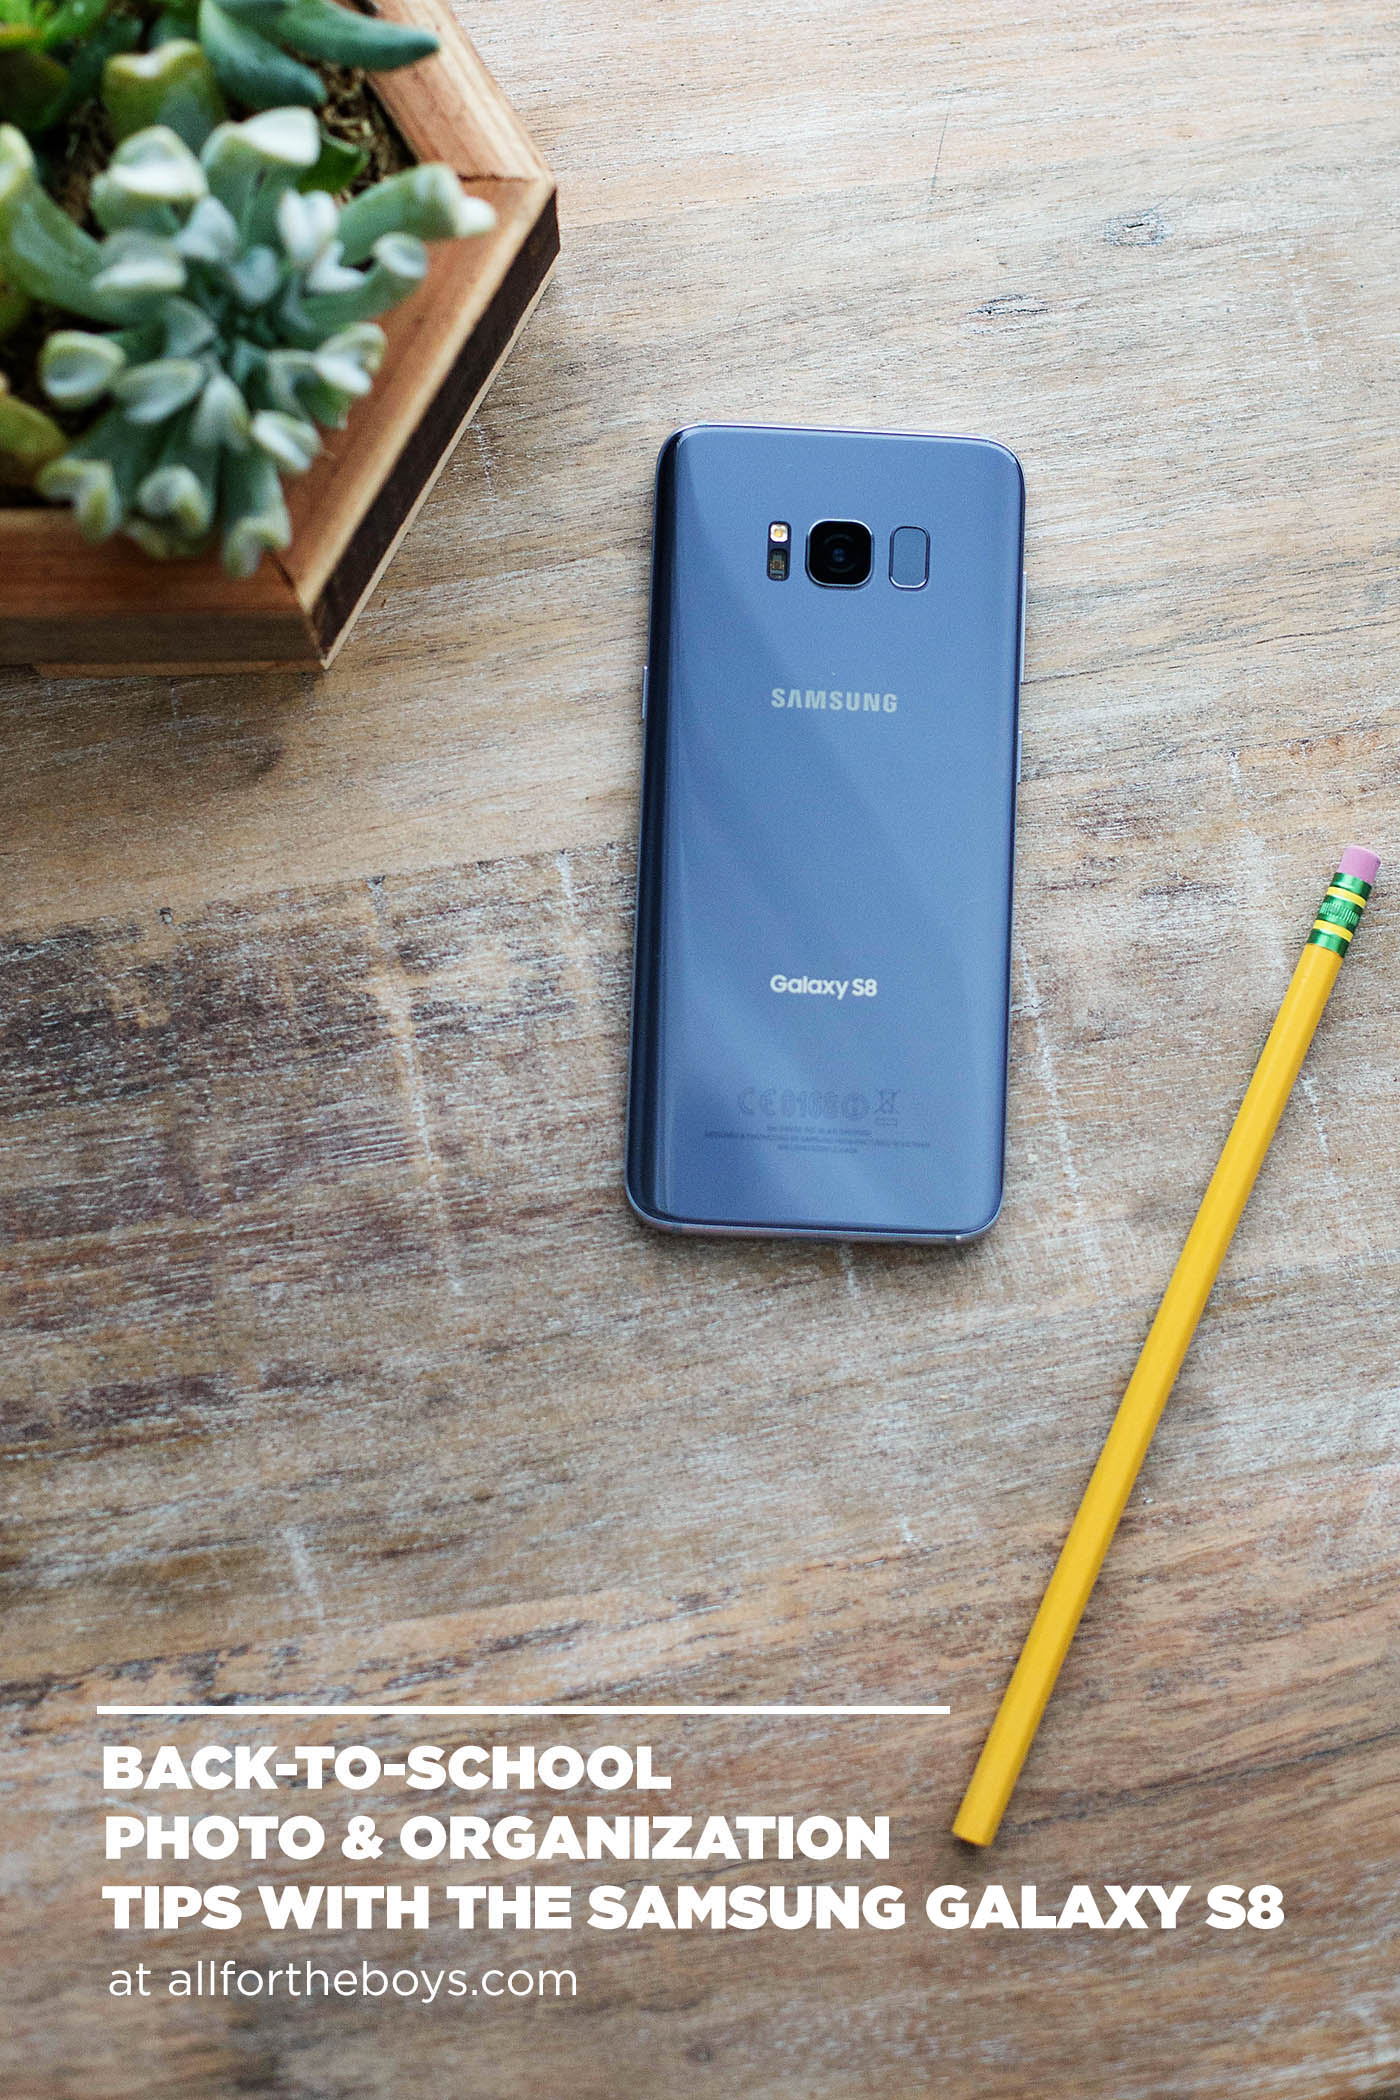 Tips for taking better back-to-school photos and paperwork organization with the Samsung Galaxy S8